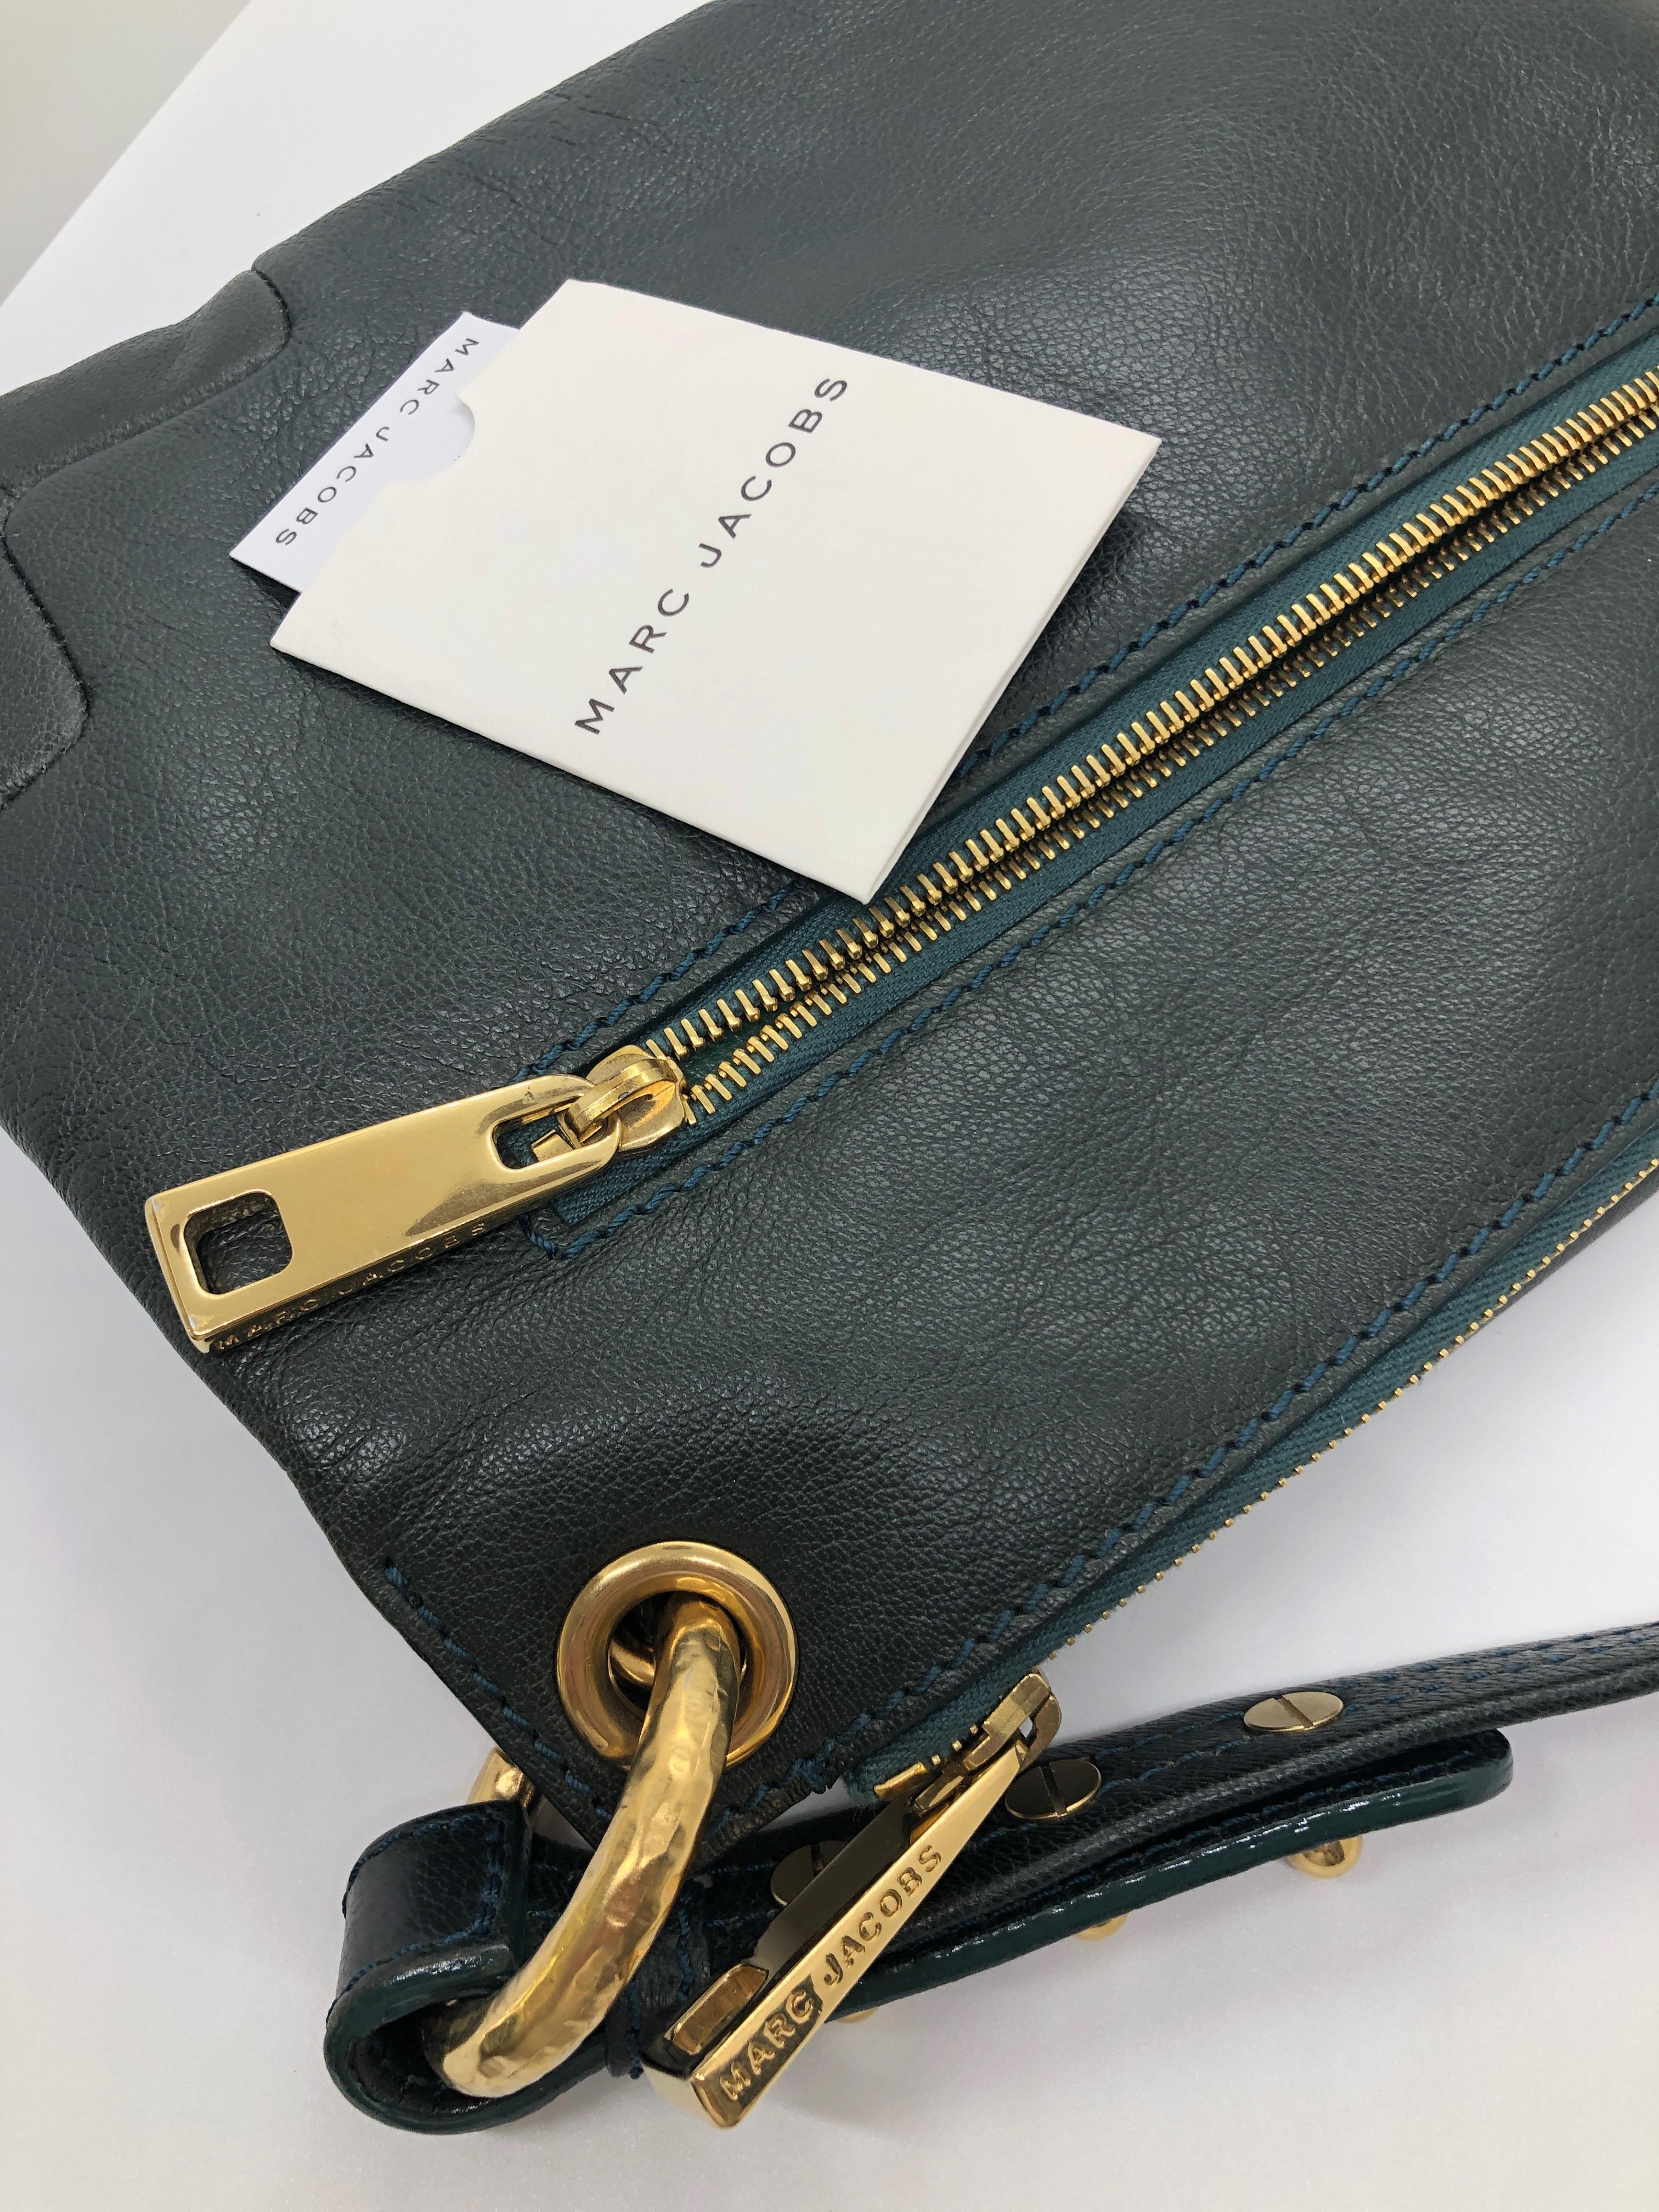 Marc Jacobs Green Leather Double Saddlebag w/ Top Handle & Metal / Jewel Accents 14